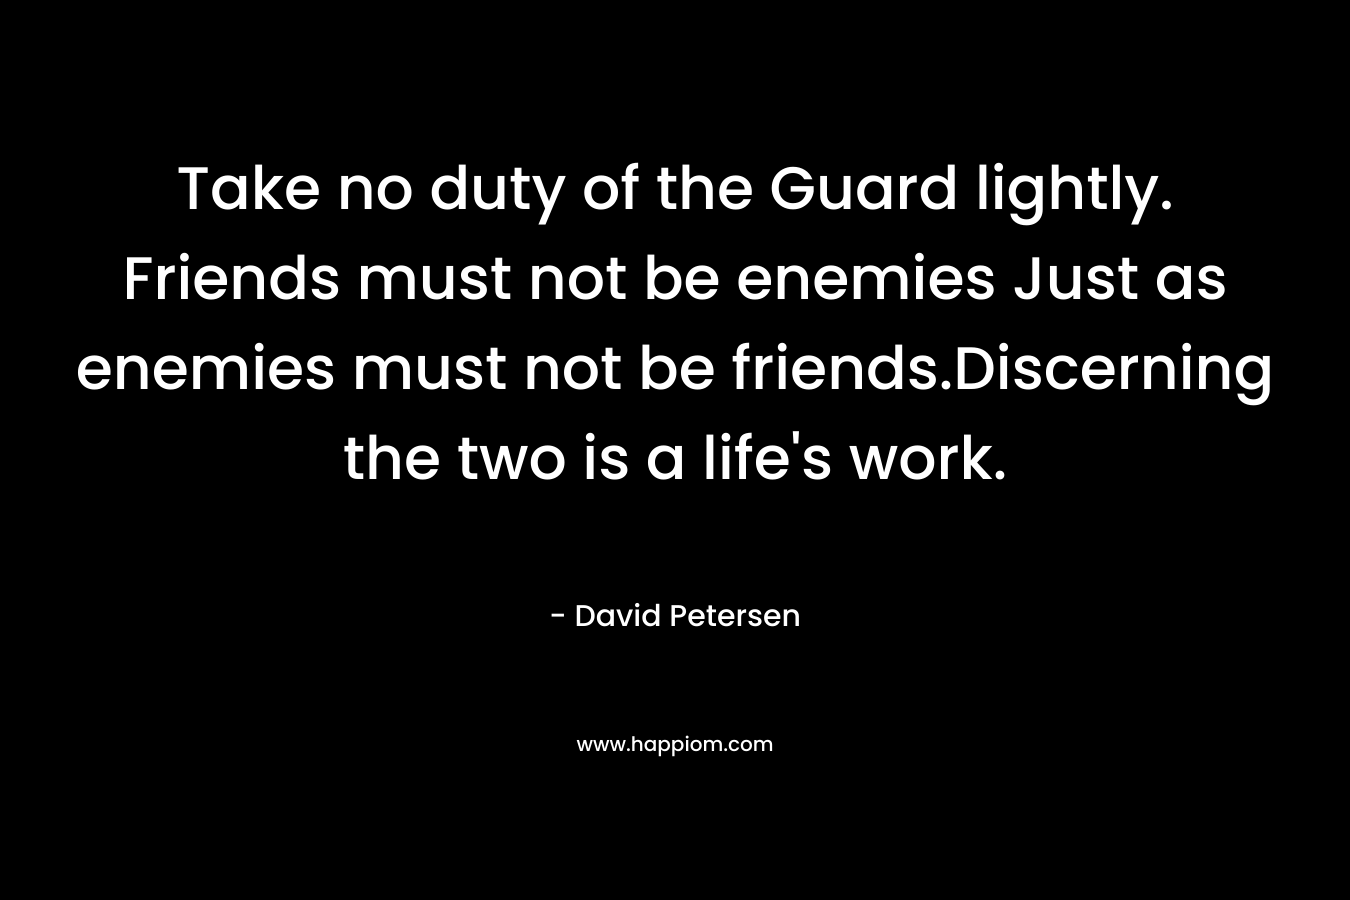 Take no duty of the Guard lightly. Friends must not be enemies Just as enemies must not be friends.Discerning the two is a life’s work. – David Petersen